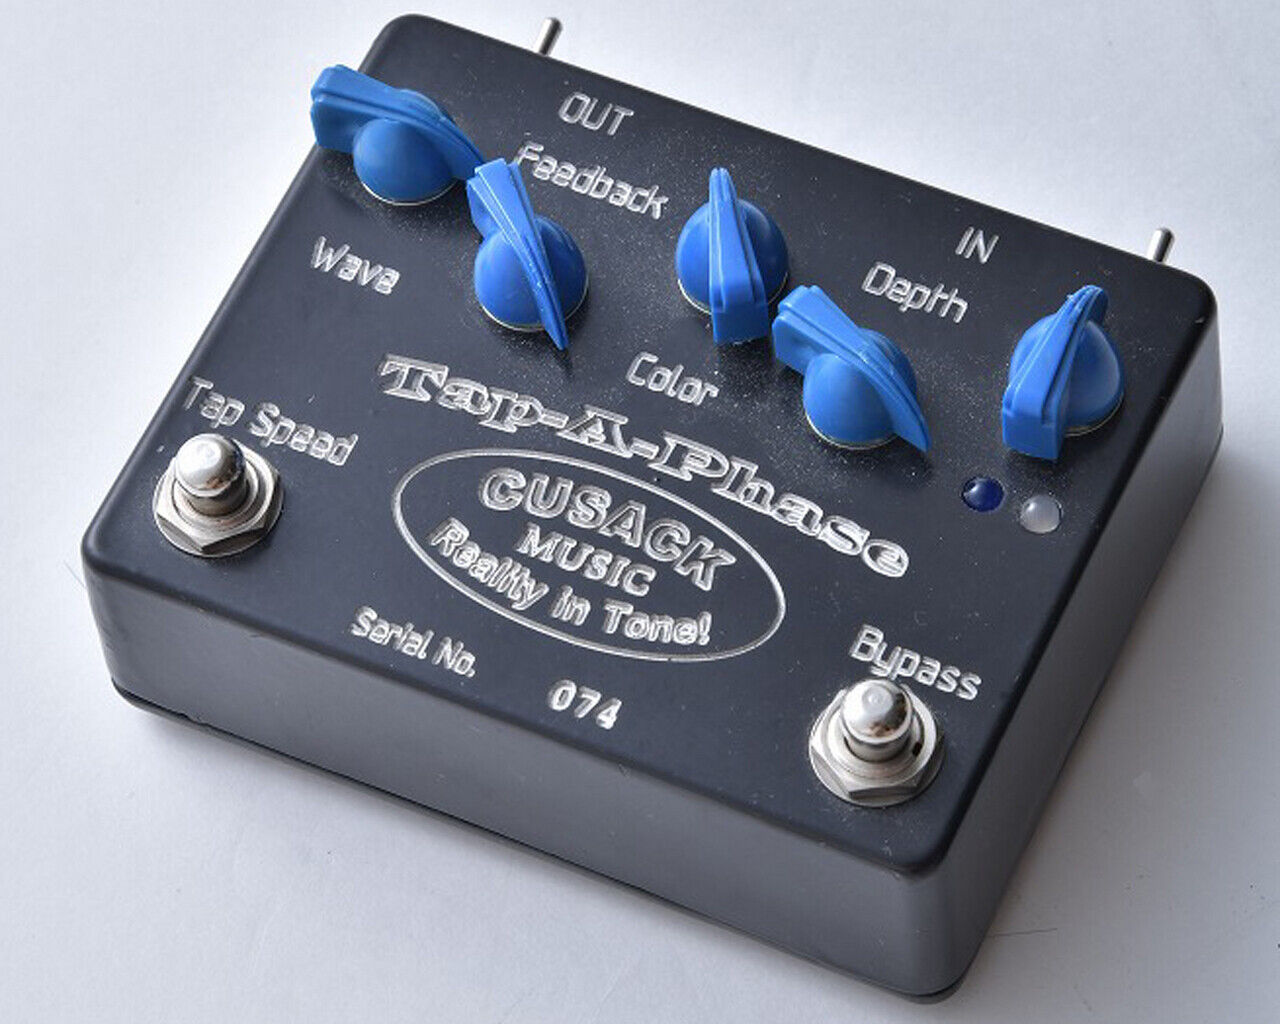 CUSACK Tap-A-PHASE Used Phaser